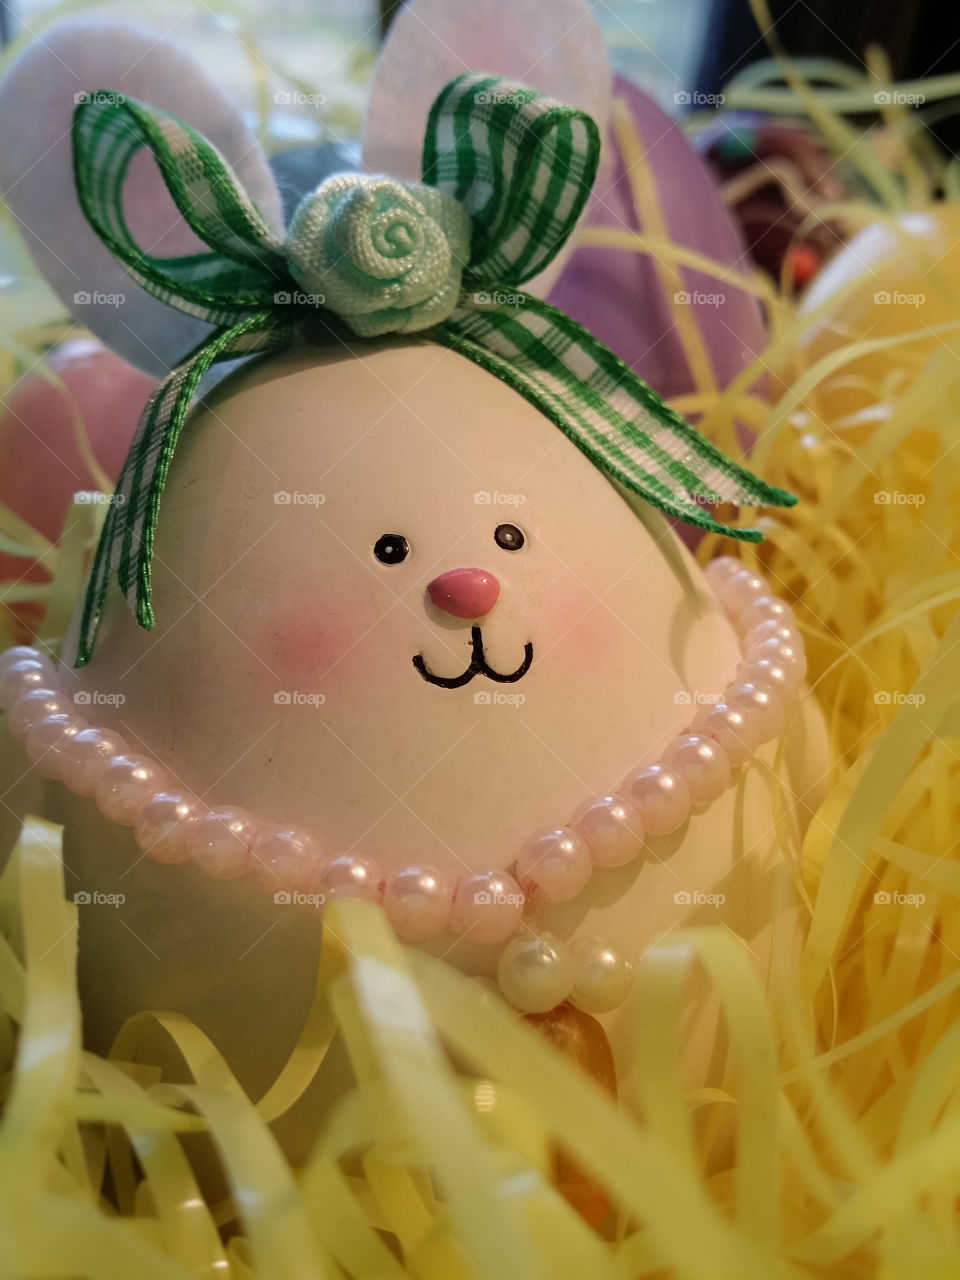 An egg dressed up like an Easter bunny